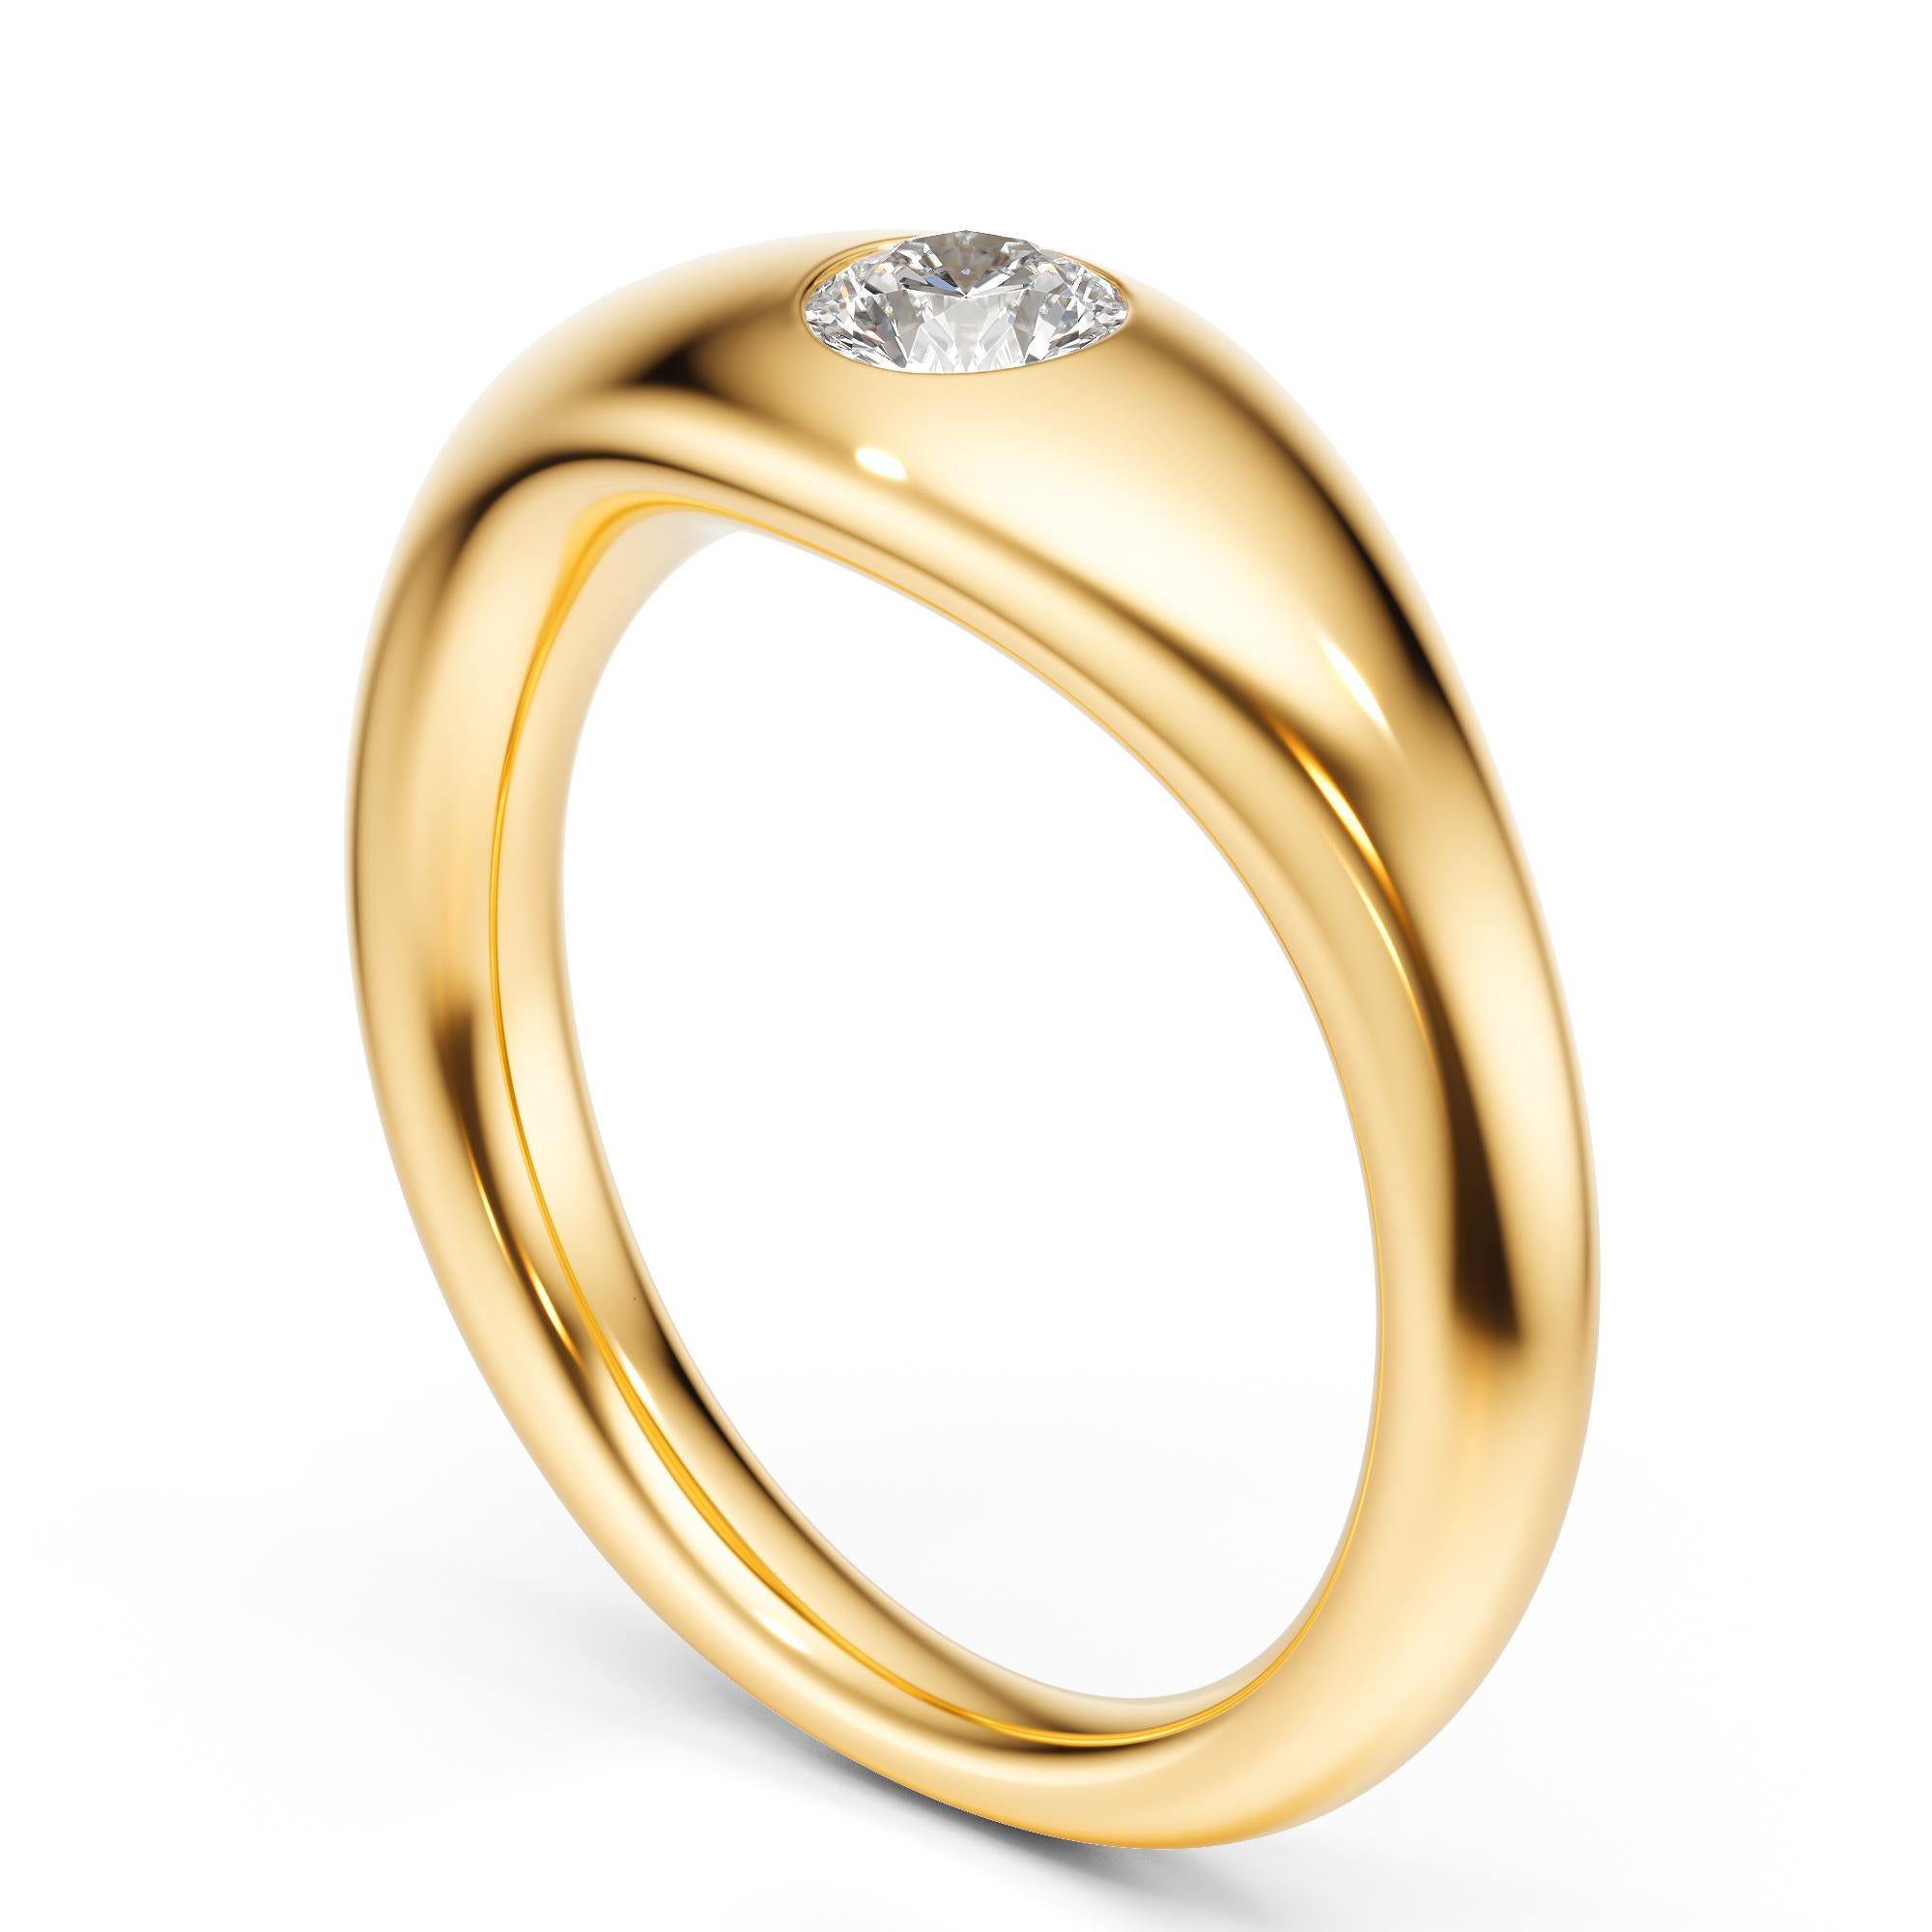 For Sale:  Ruth Nyc Lun Ring, 14k Yellow Gold and Diamond 3